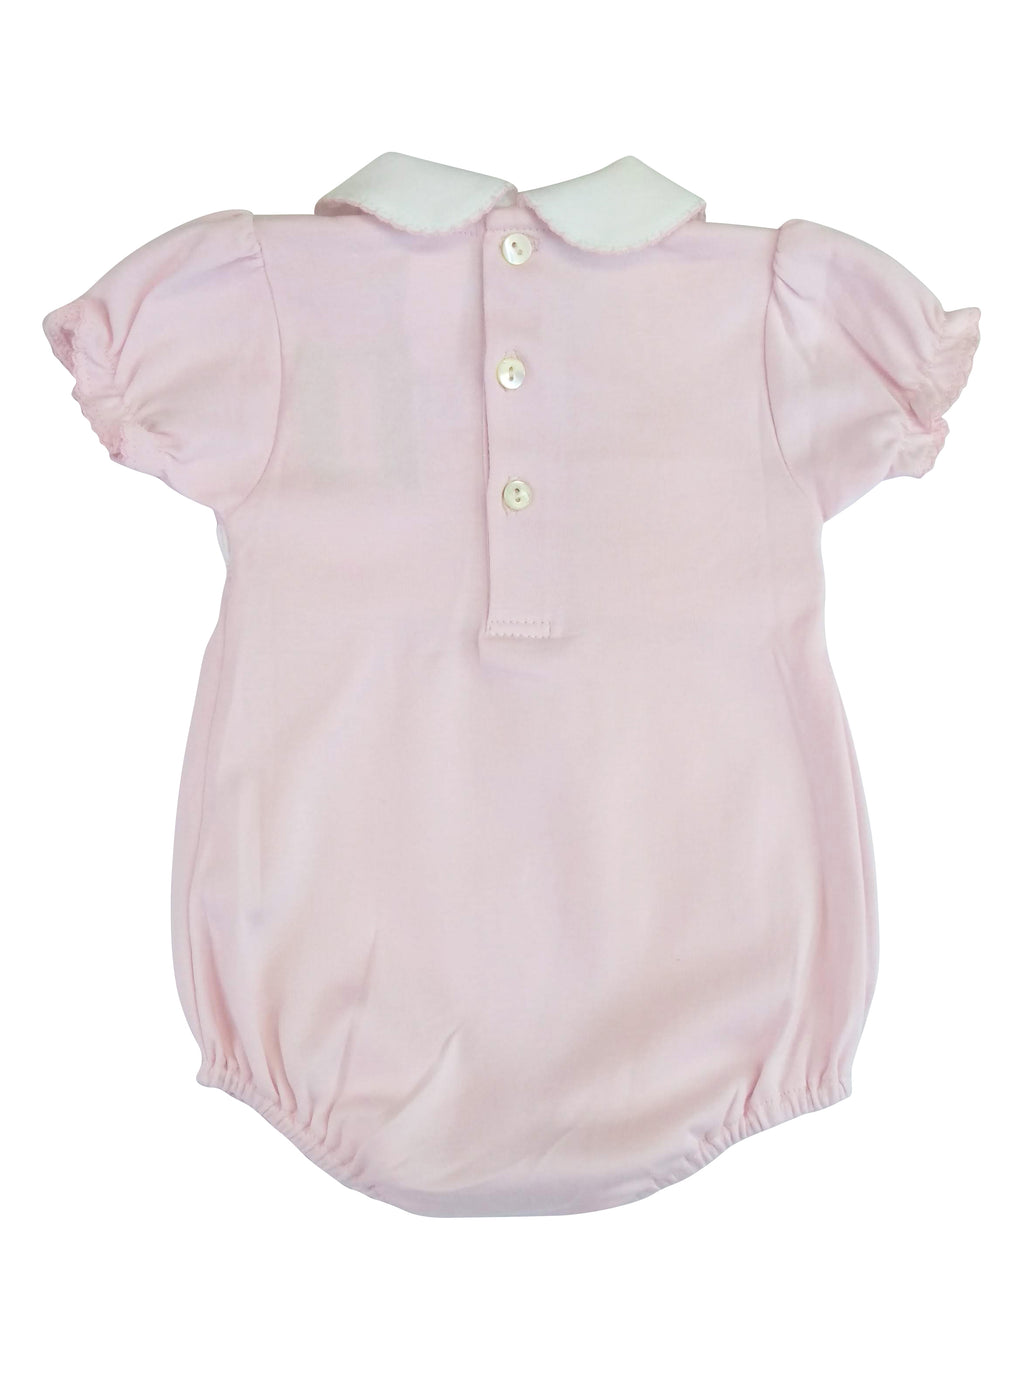 Baby Girl's Pink Bows Smocked Romper - Little Threads Inc. Children's Clothing